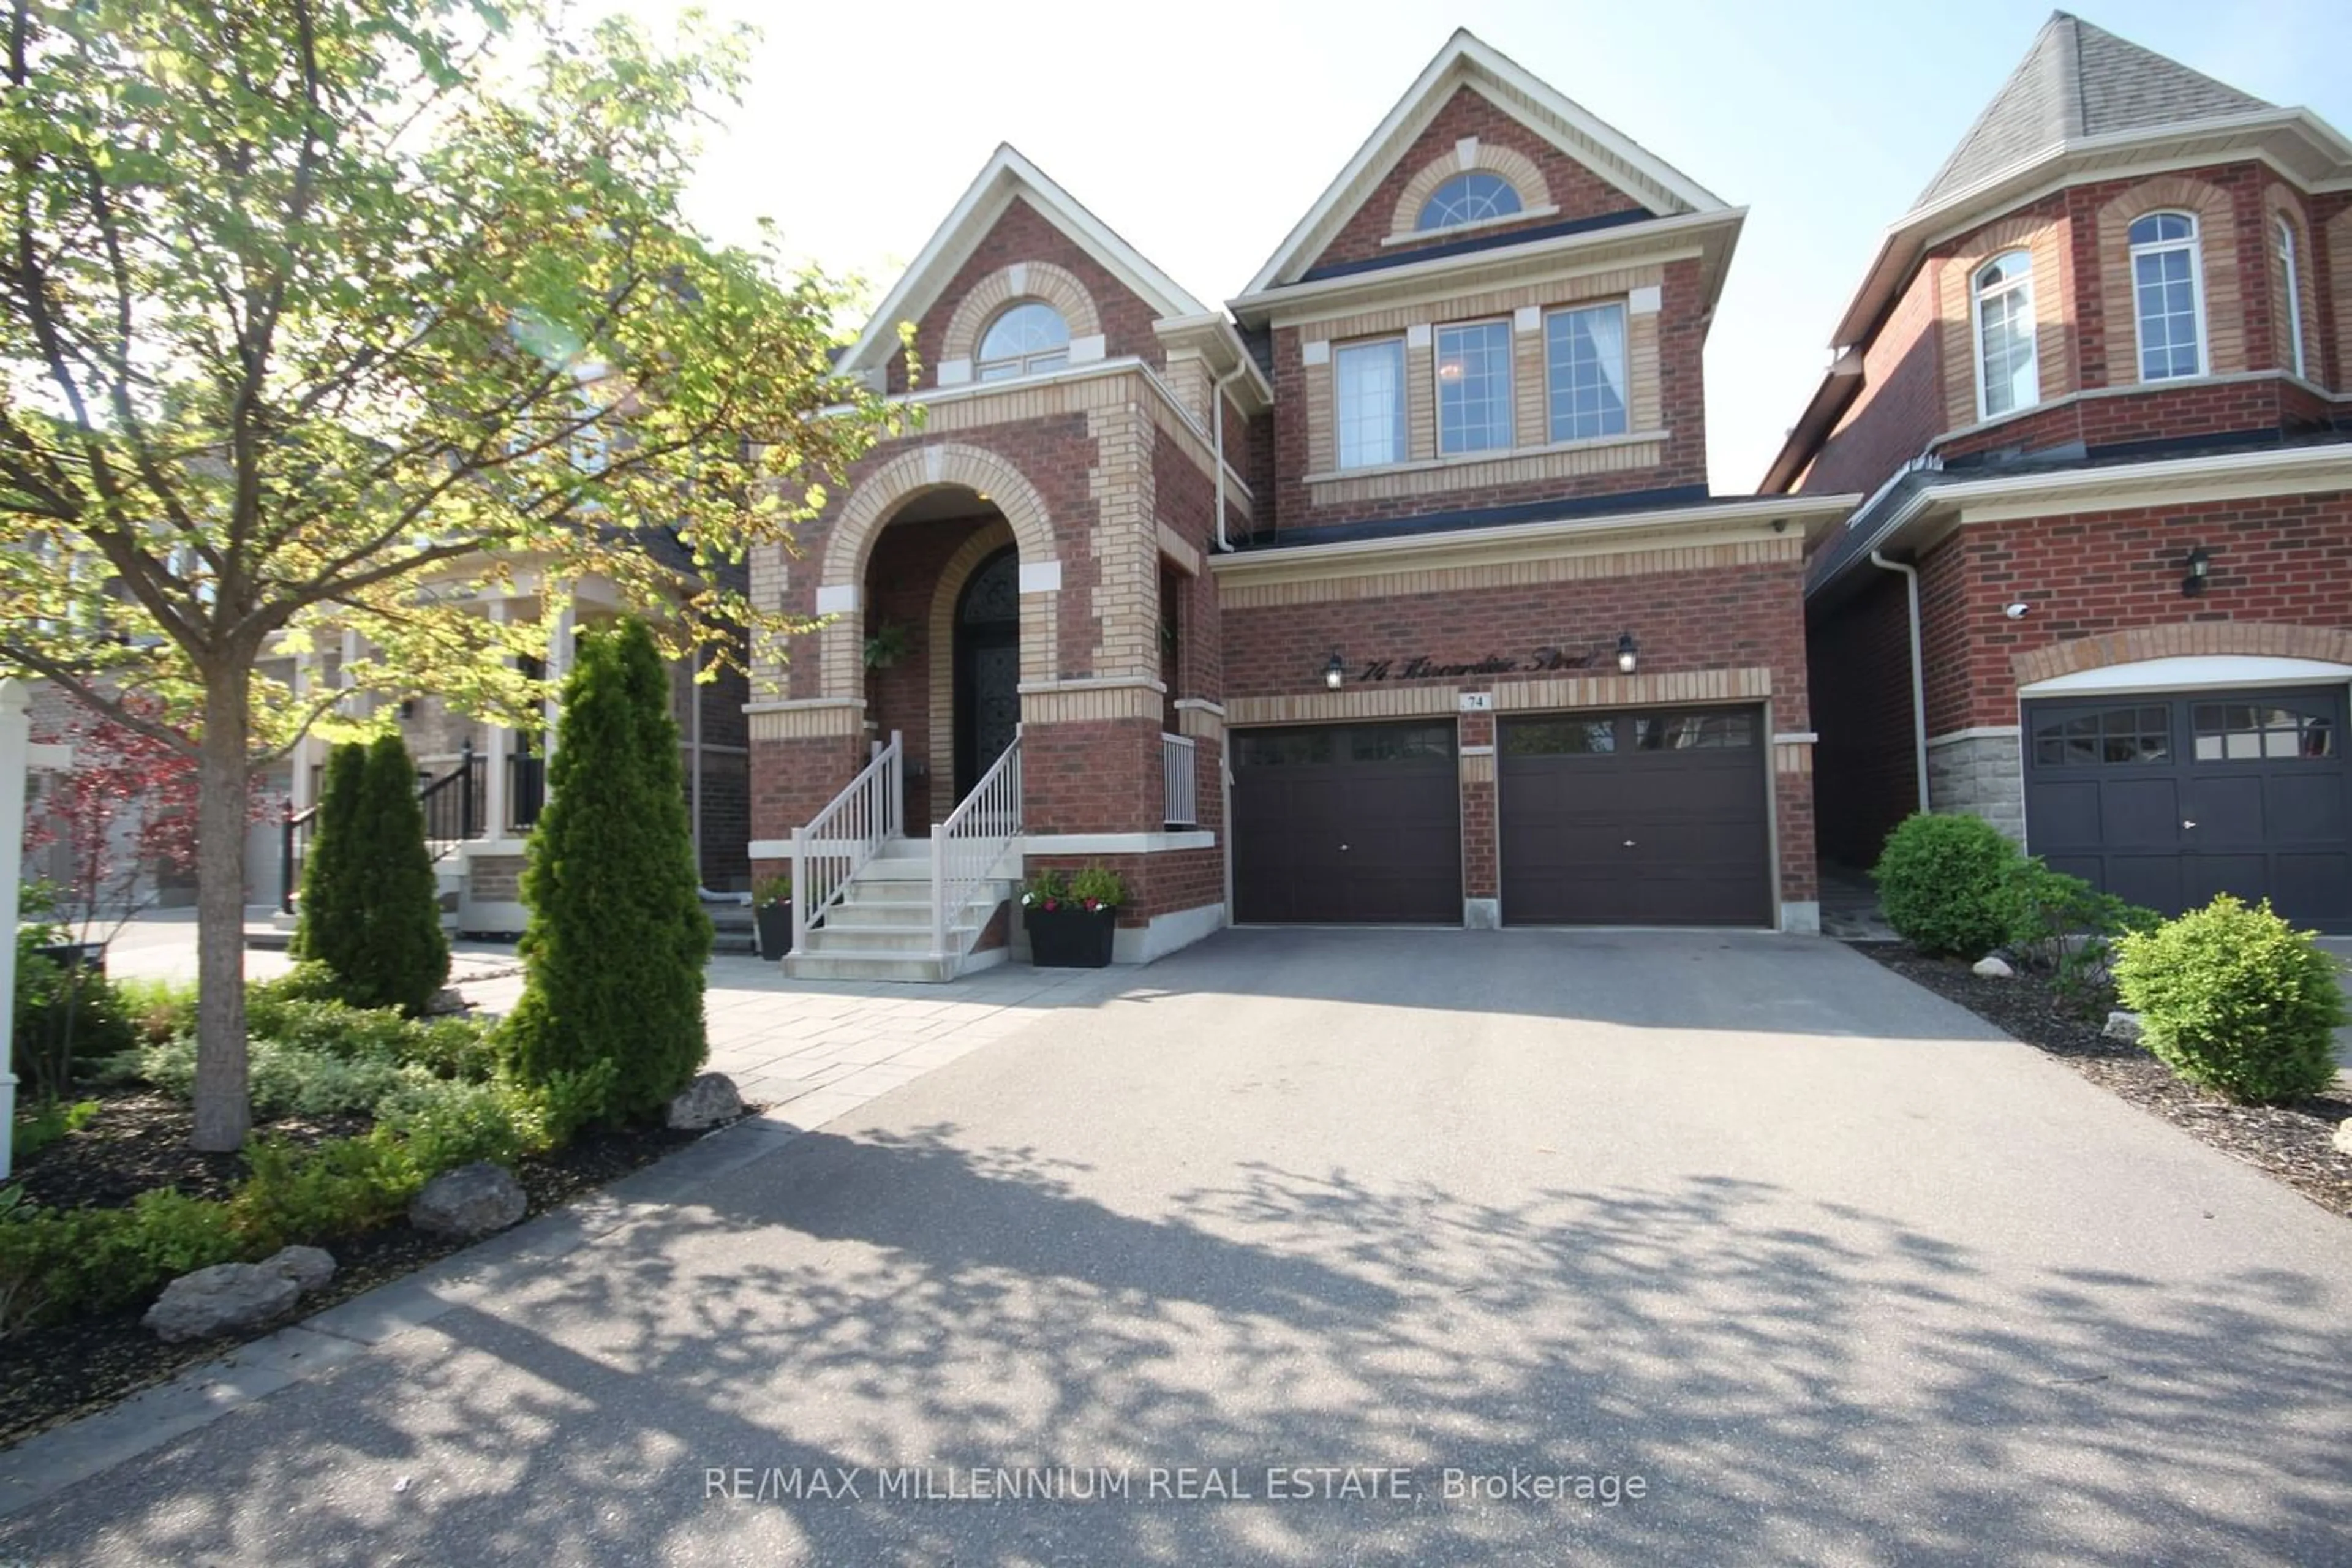 Home with brick exterior material for 74 Kincardine St, Vaughan Ontario L4H 4H7